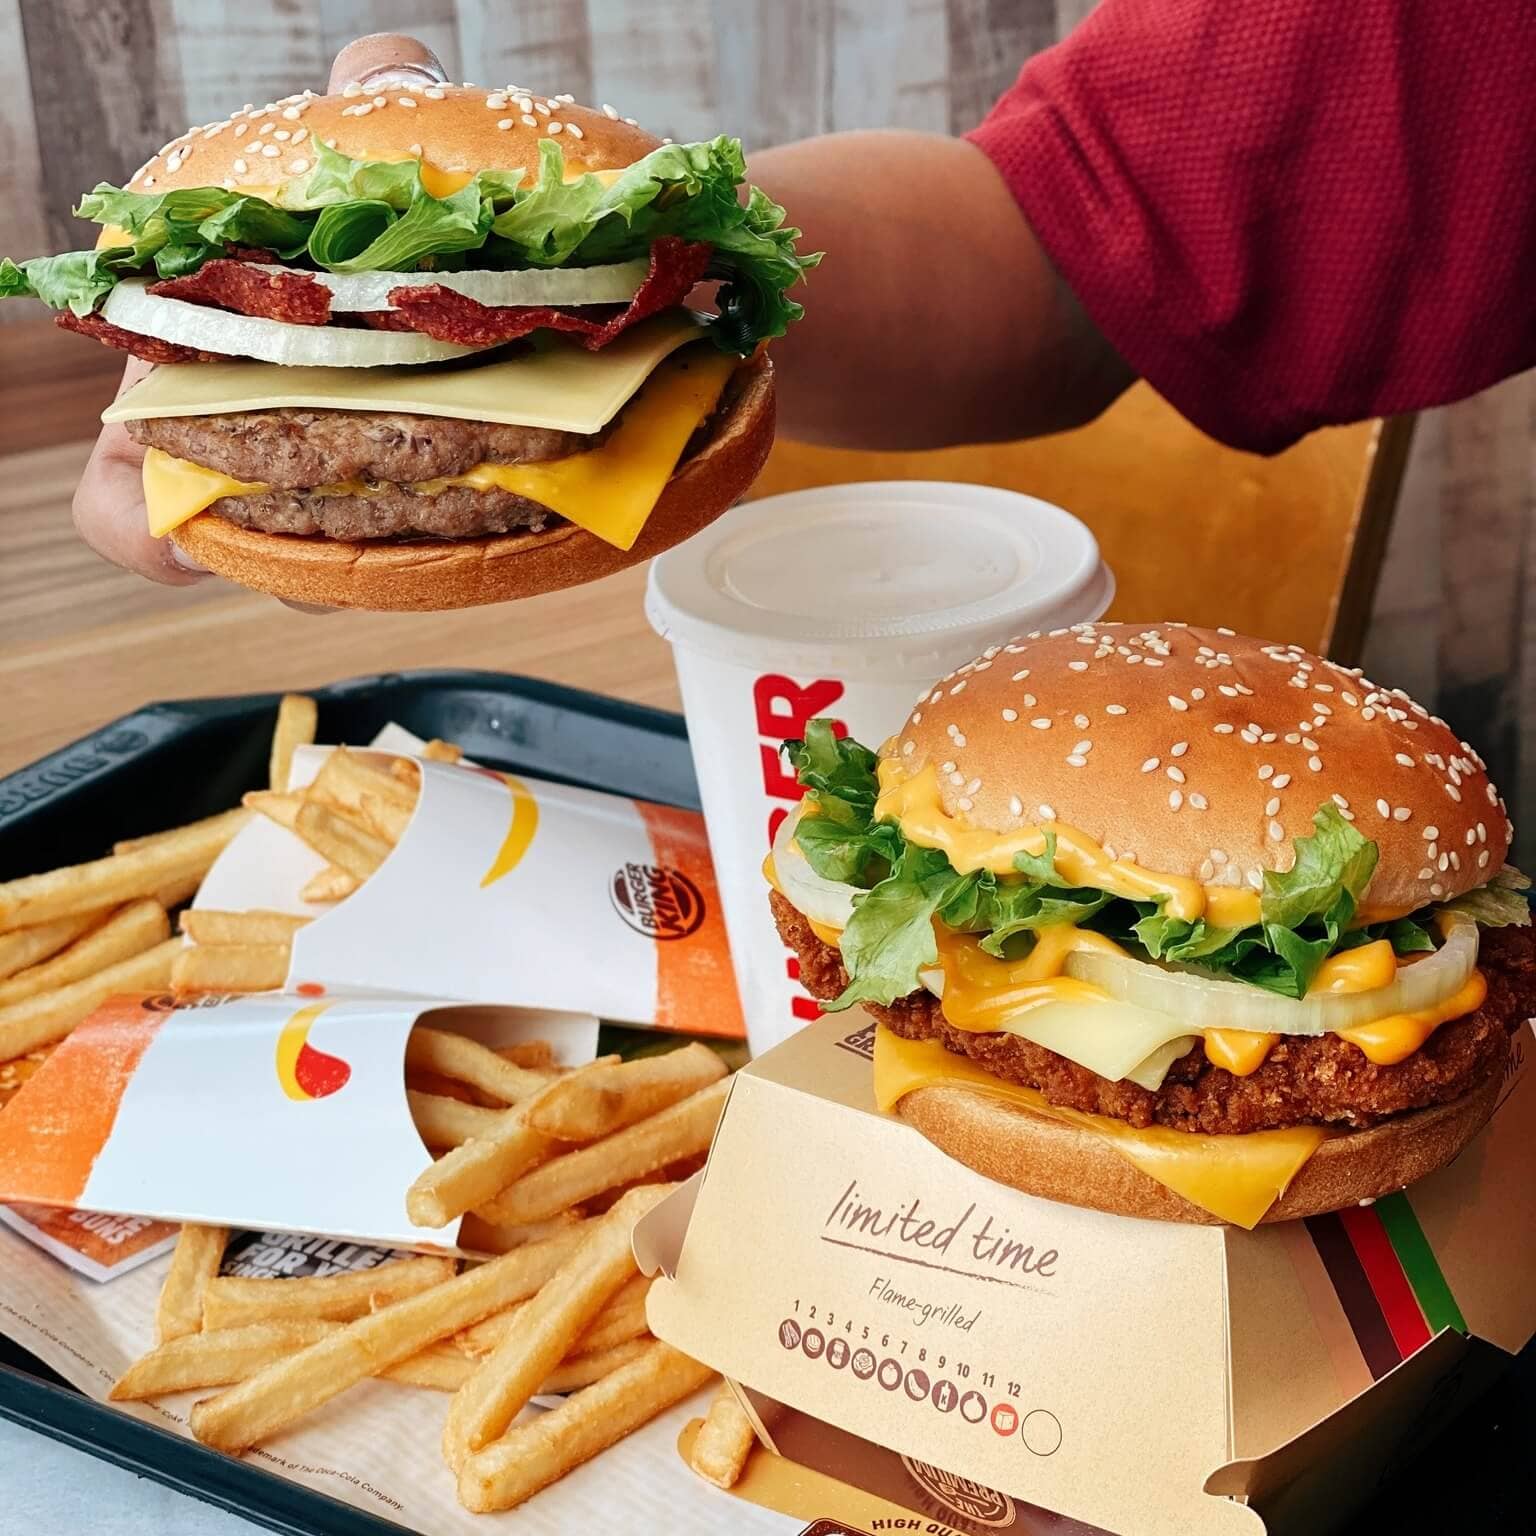 Indulge in a whopping burger loaded with juicy flavours and grilled to perfection at Burger King.